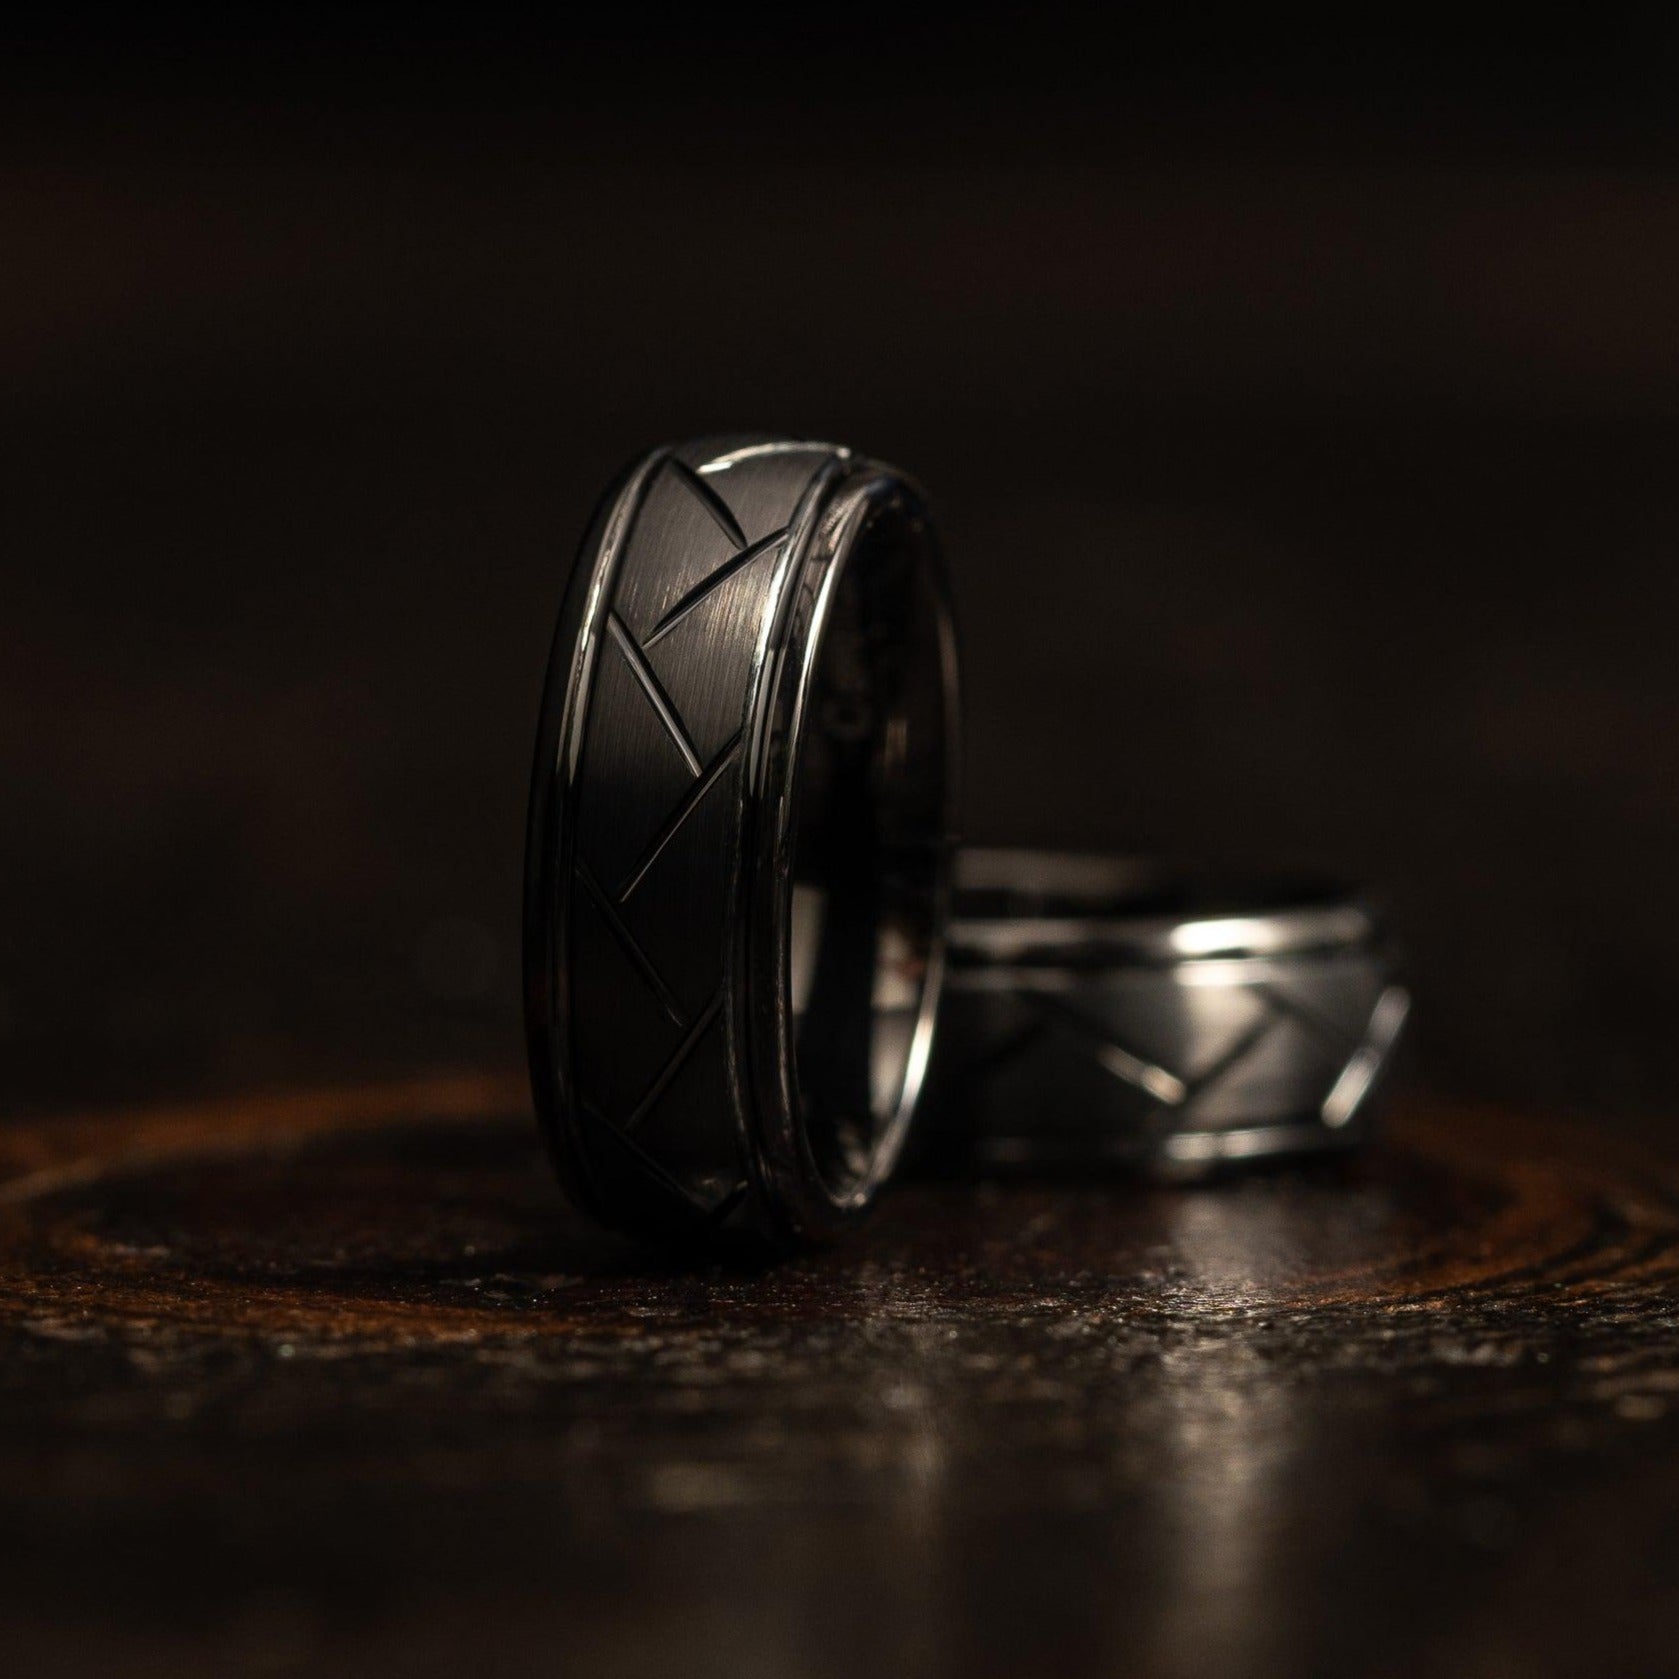 "Aries" Black Tungsten Carbide Ring- Domed with Cut- 8mm